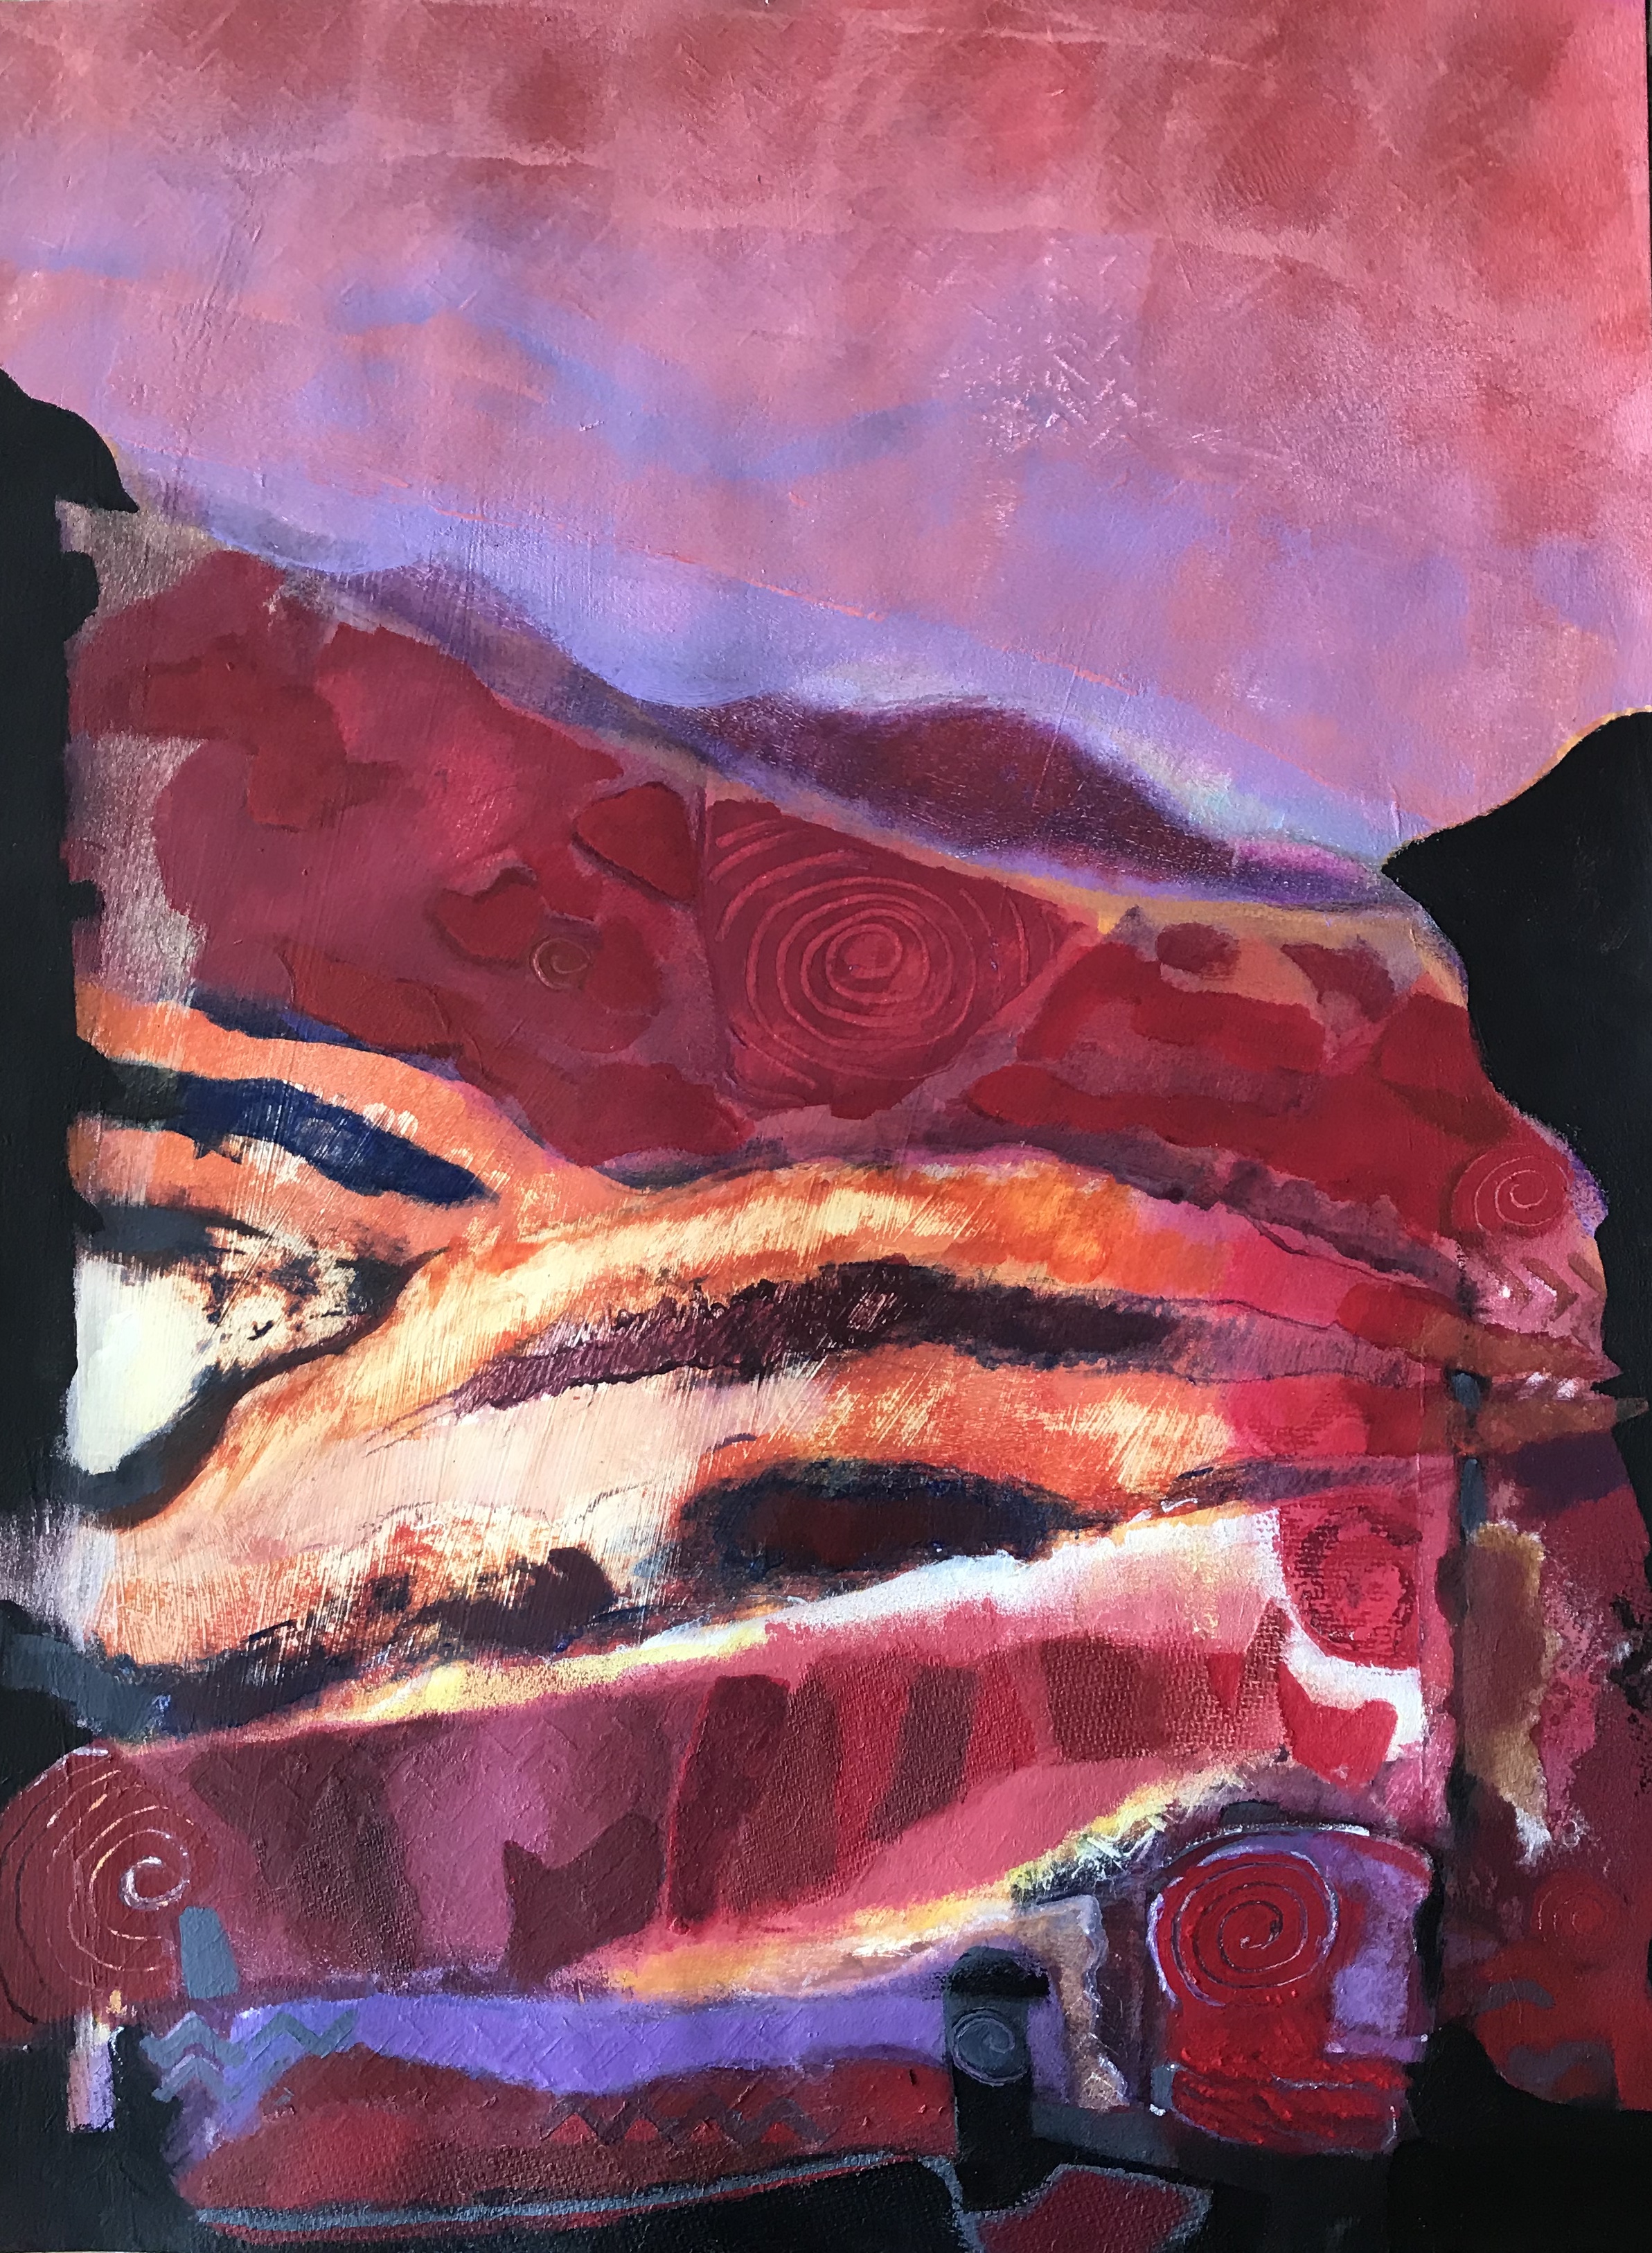  “Red Canyon Sunset”  painting  acrylic on Strathmore paper  30” x 24” 